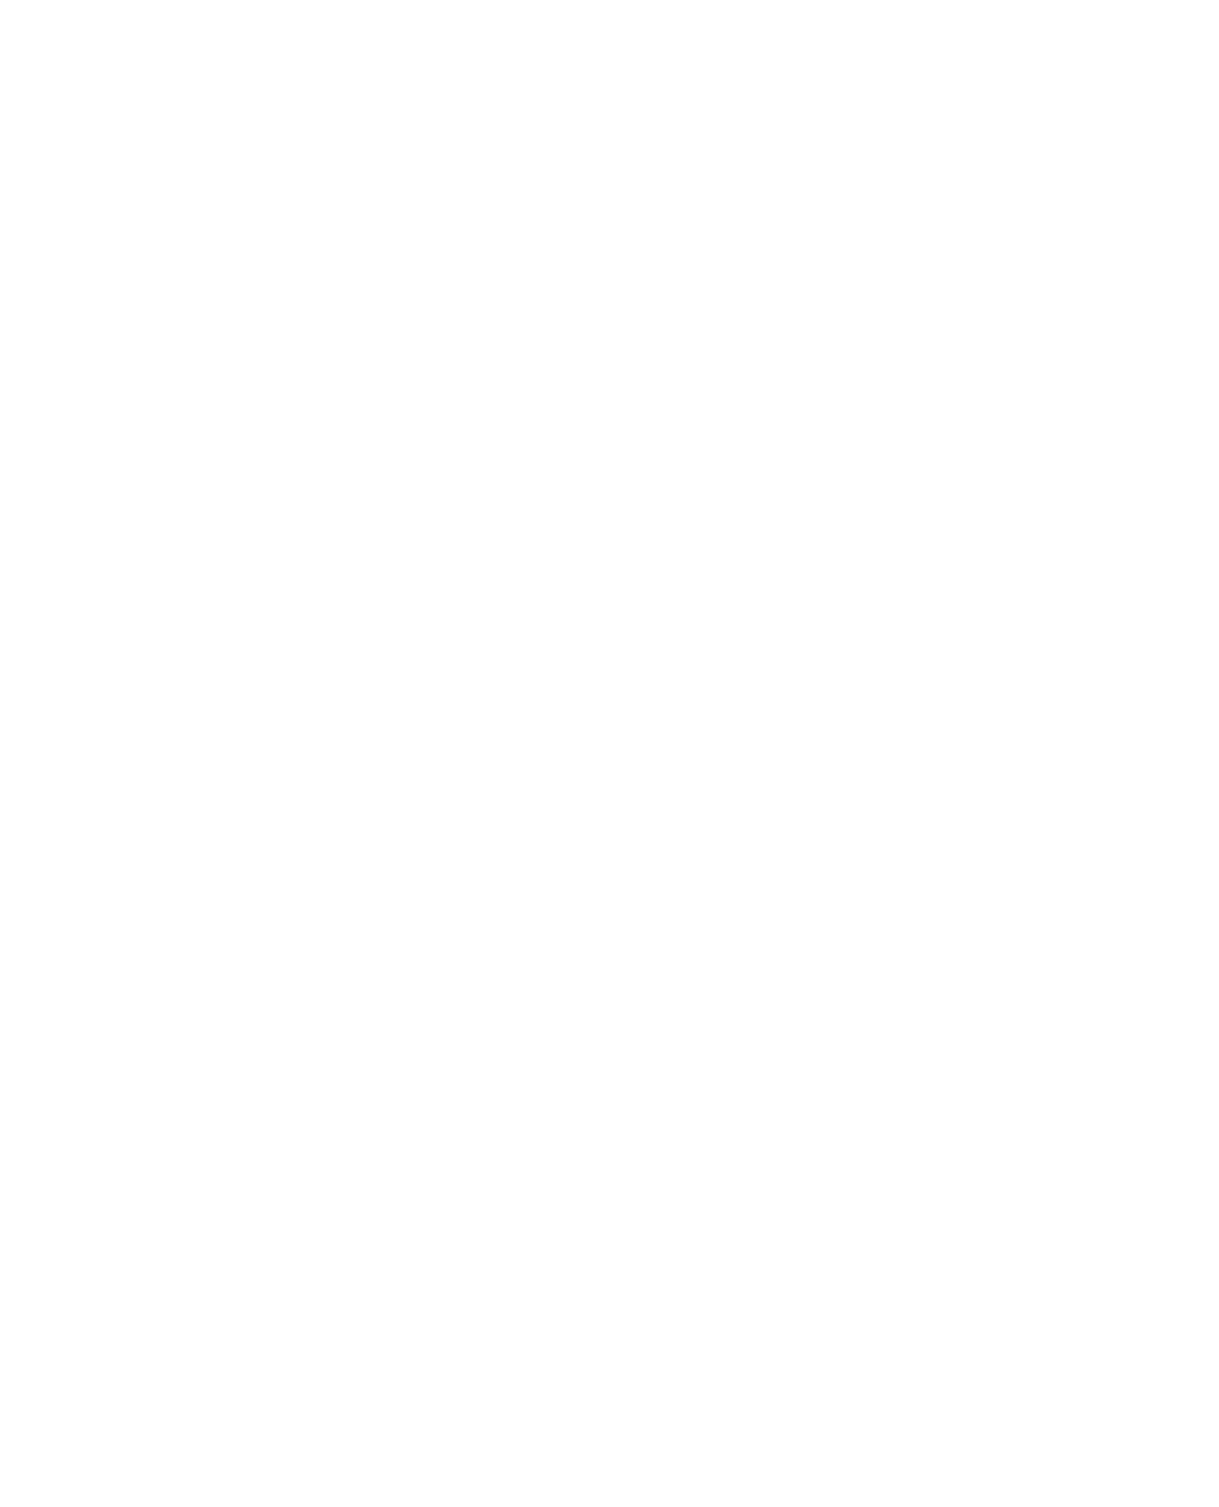 Ohio Owned and Operated